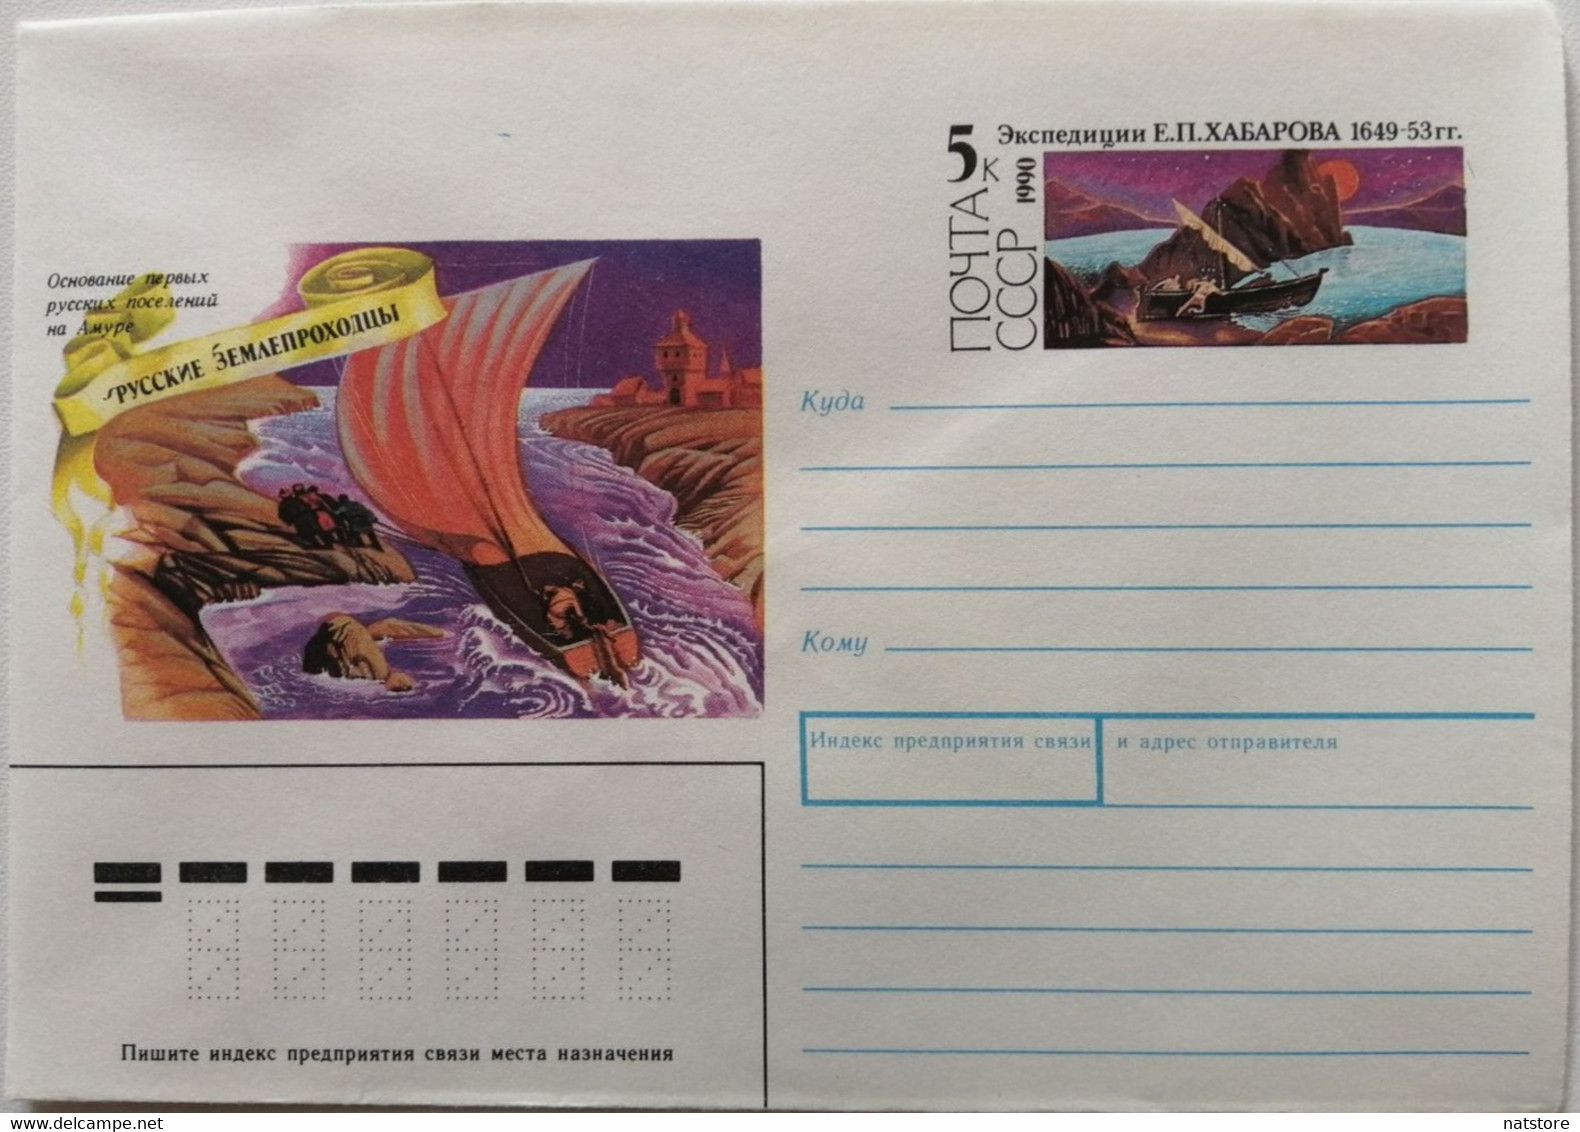 1990..USSR.COVER WITH STAMP..FOUNDATIONOF THE FIRST RUSSIANS SETTLEMENTS ON THE AMUR.KHABAROV EXPEDITION.. NEW!!! - Explorateurs & Célébrités Polaires